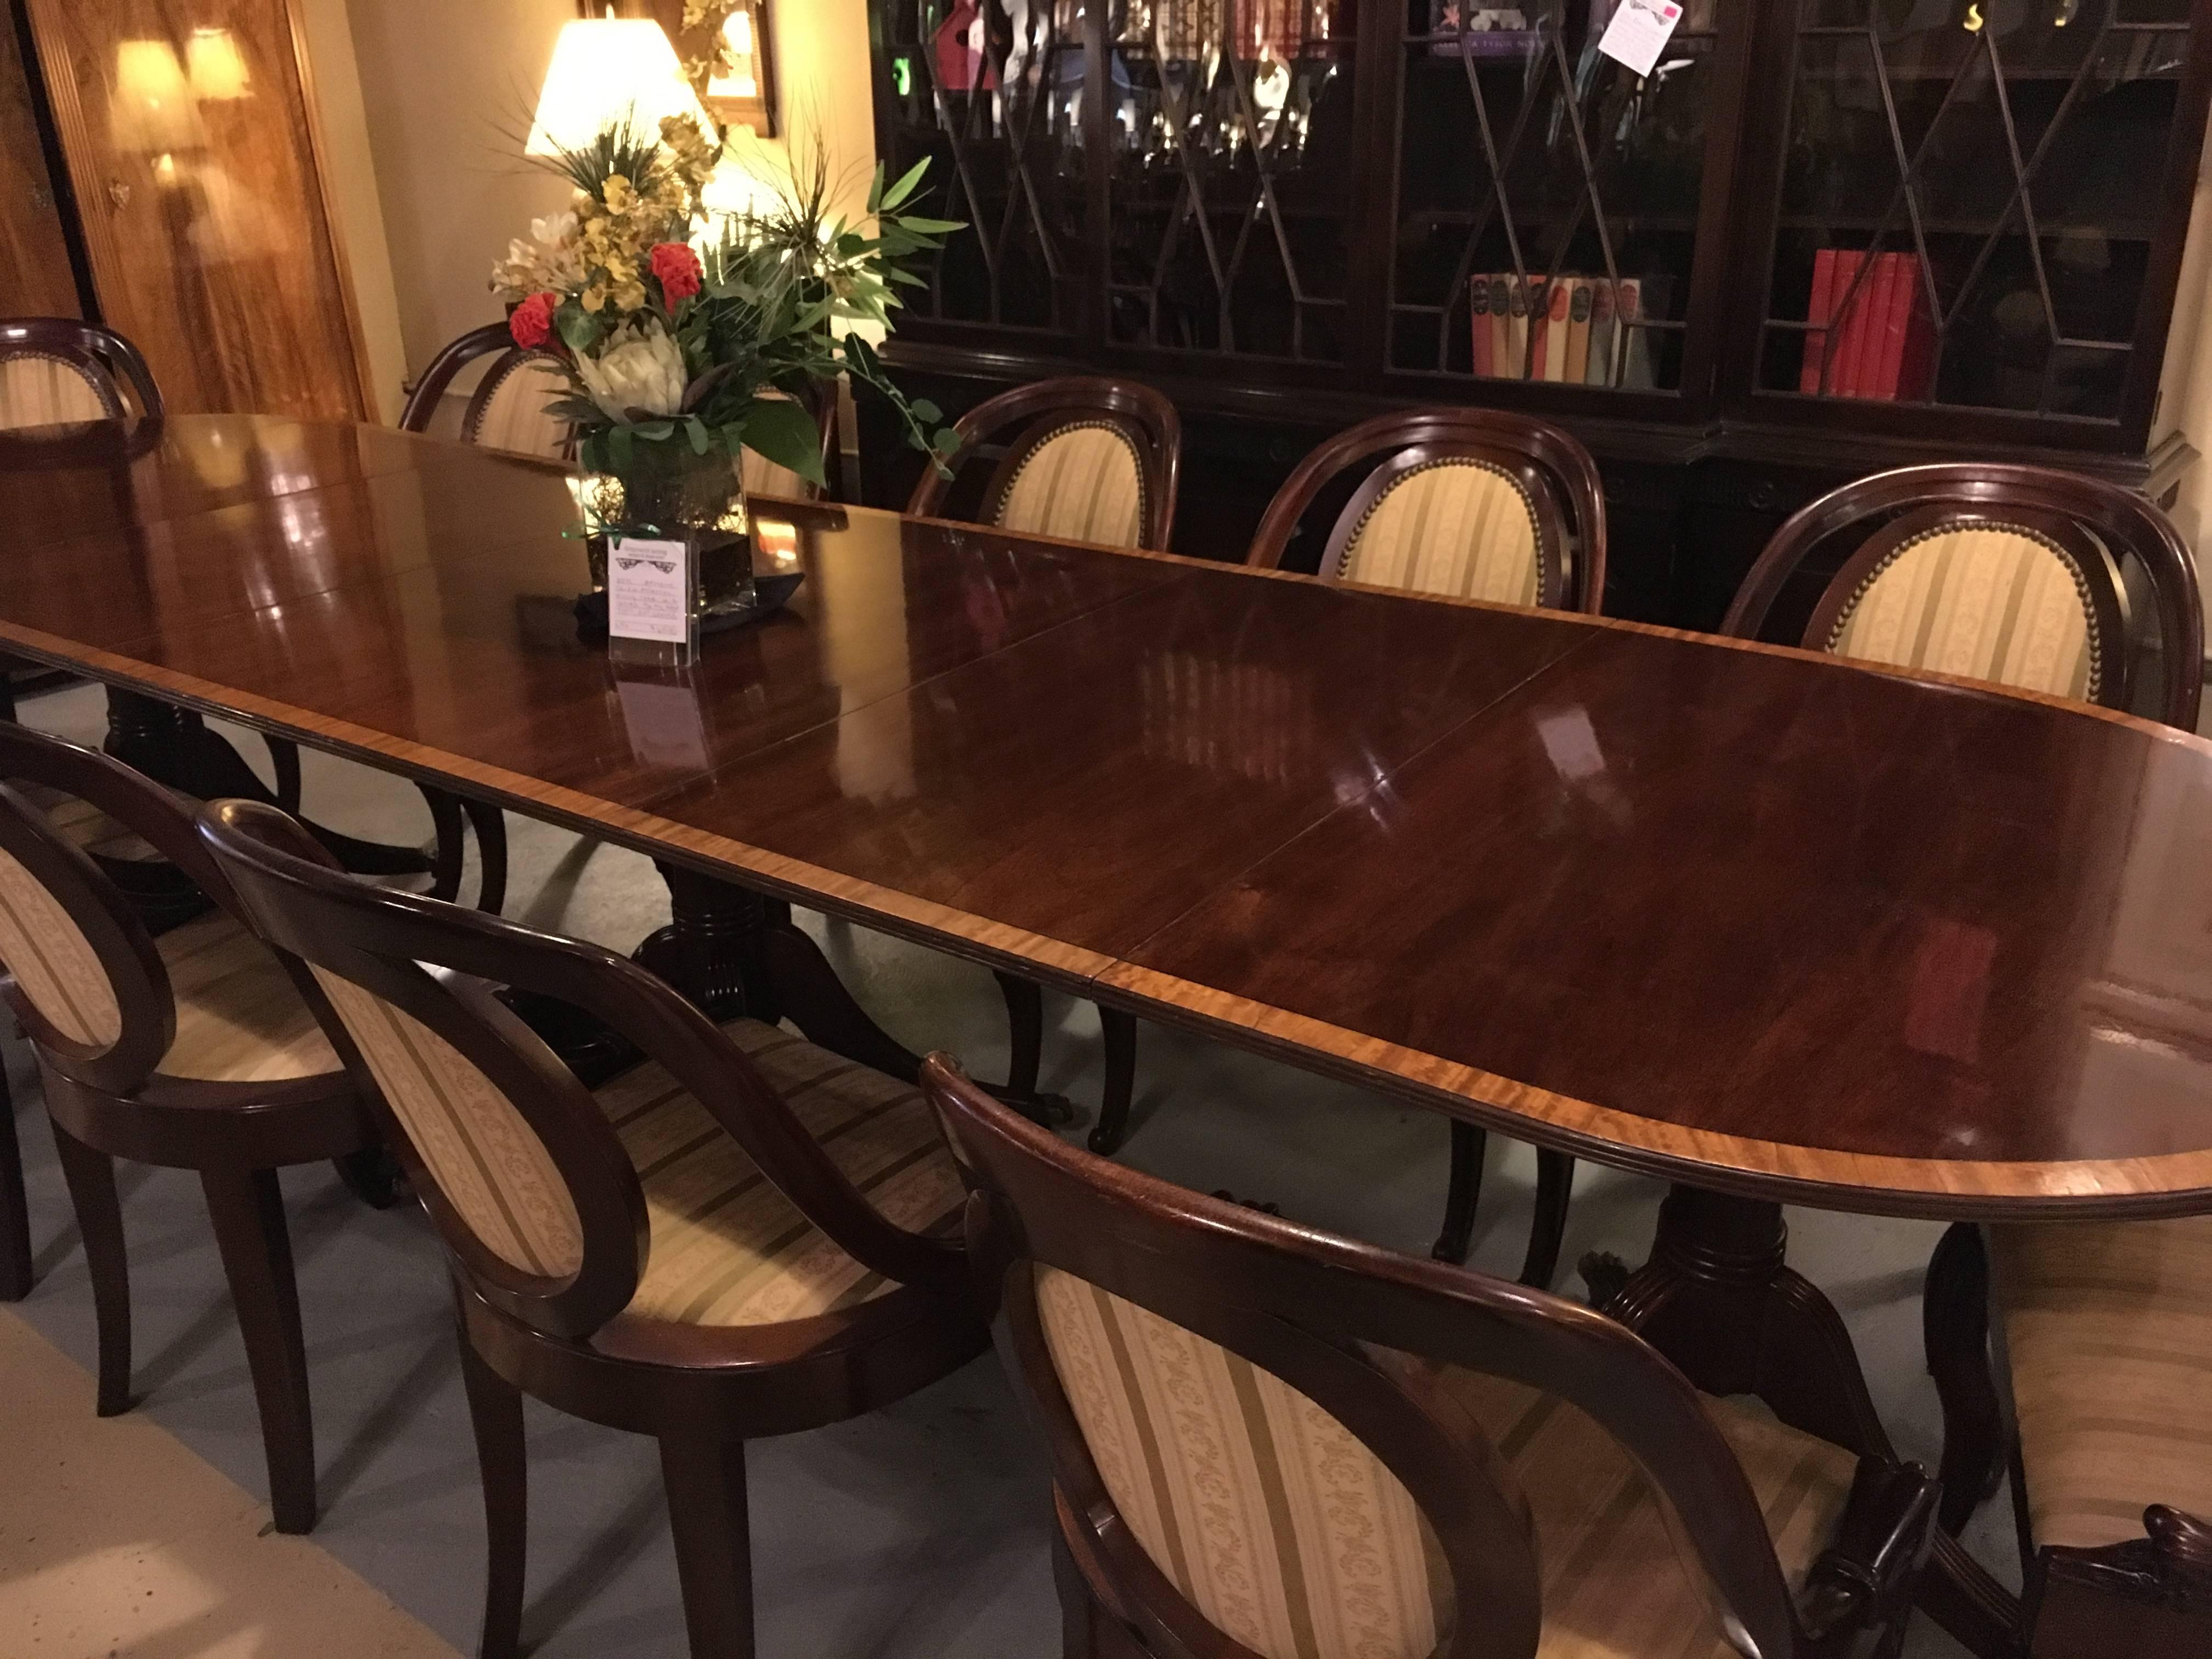 A banded mahogany Georgian style triple pedestal dining table. A fine custom quality dining table that has recently been polished having two (20 inch) leaves. This triple pedestal dining table sits on bronze claw feet with casters. The bases with